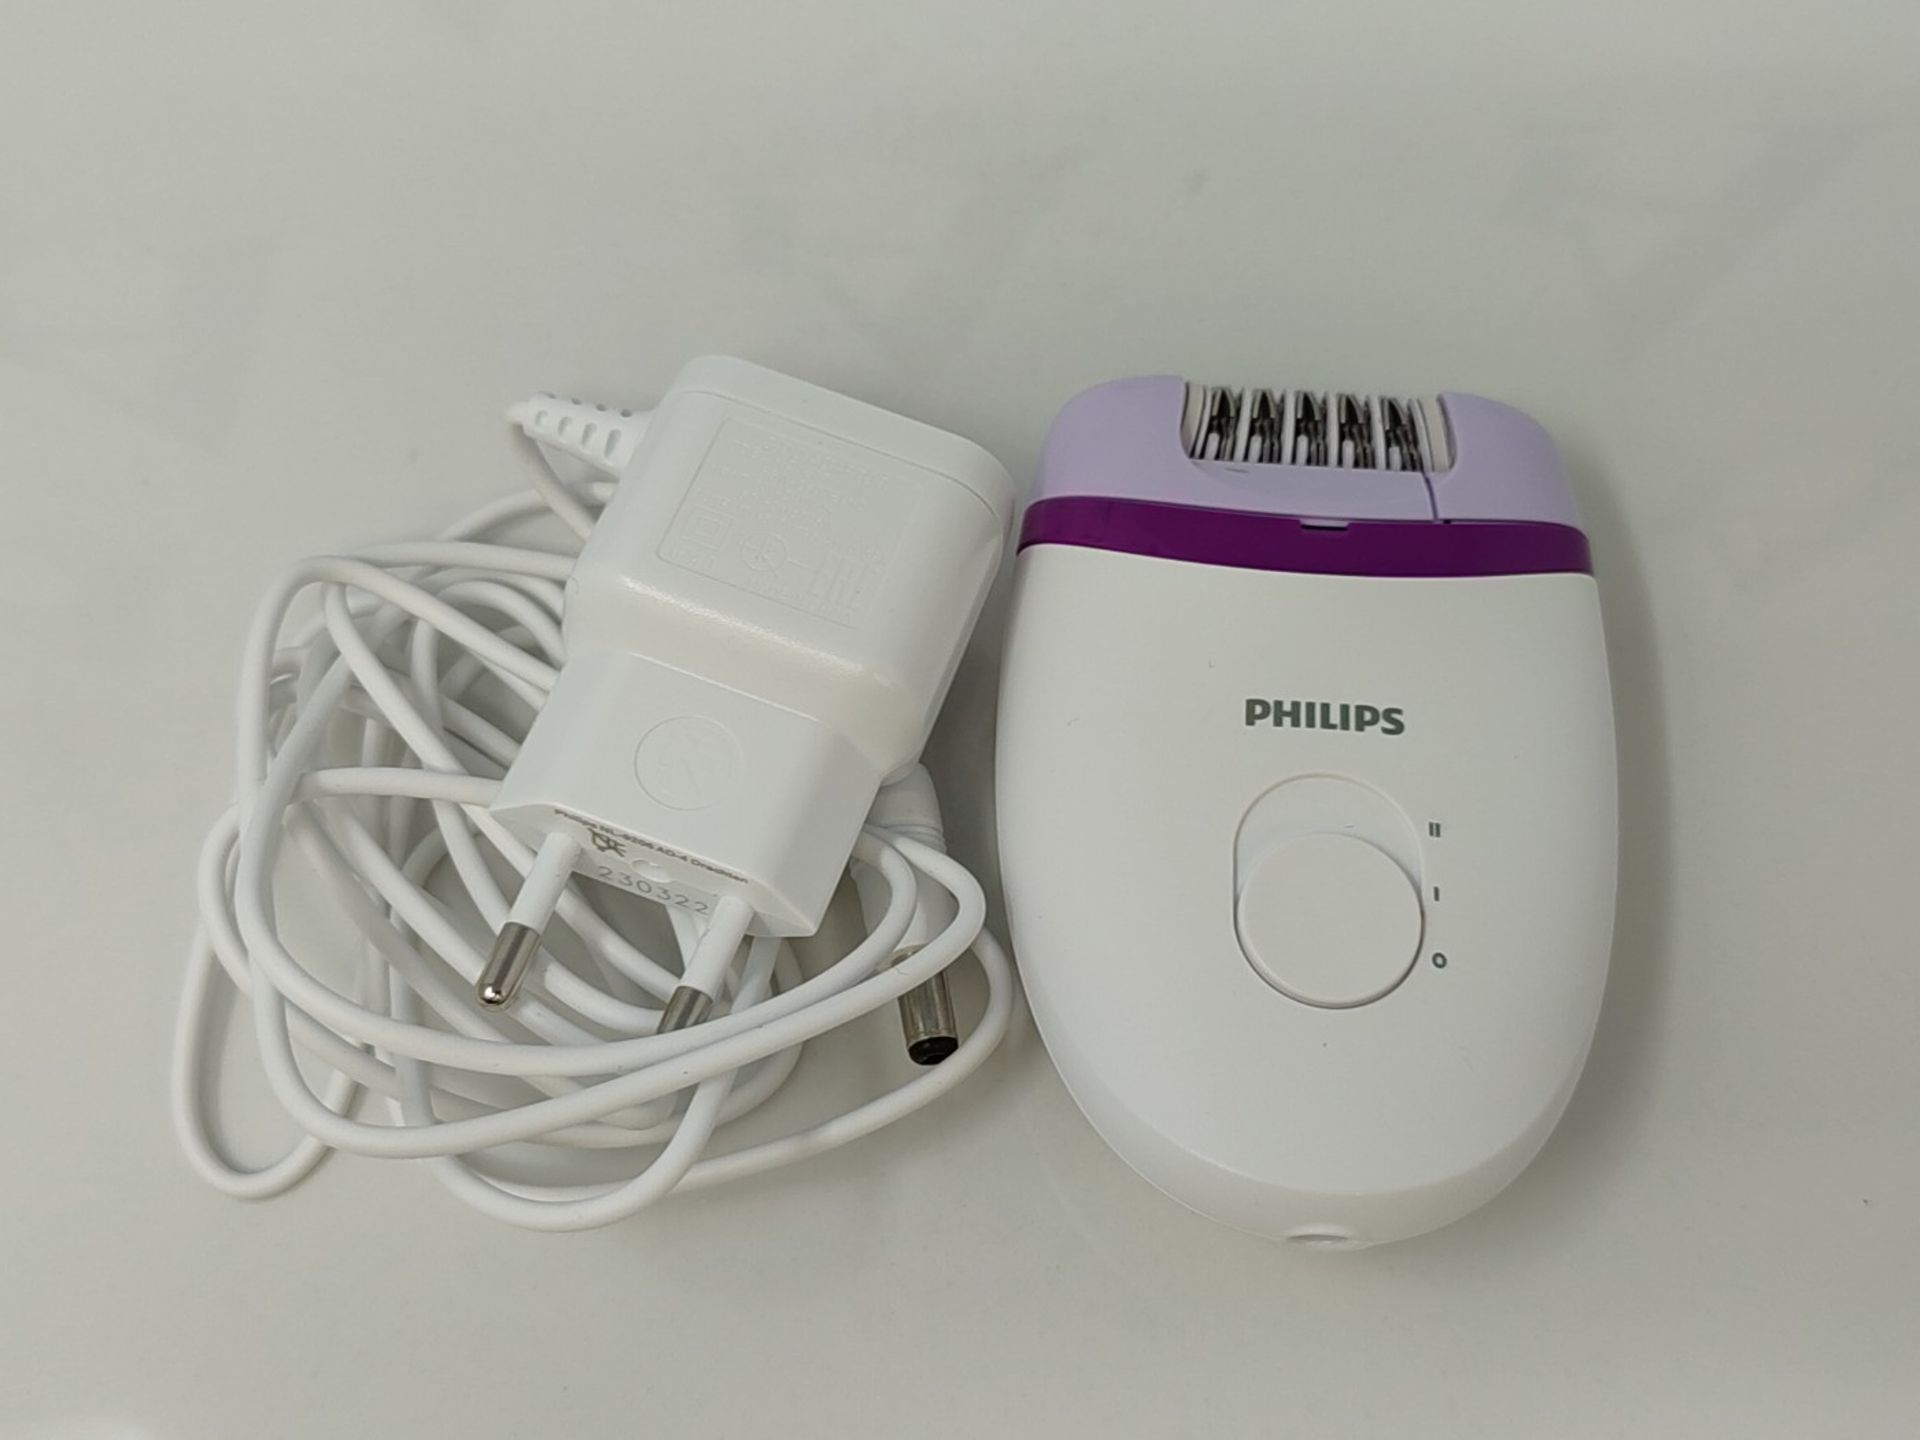 Philips Satinelle Essential Epilator with 21 attachments and 2 speed settings (model B - Image 2 of 4